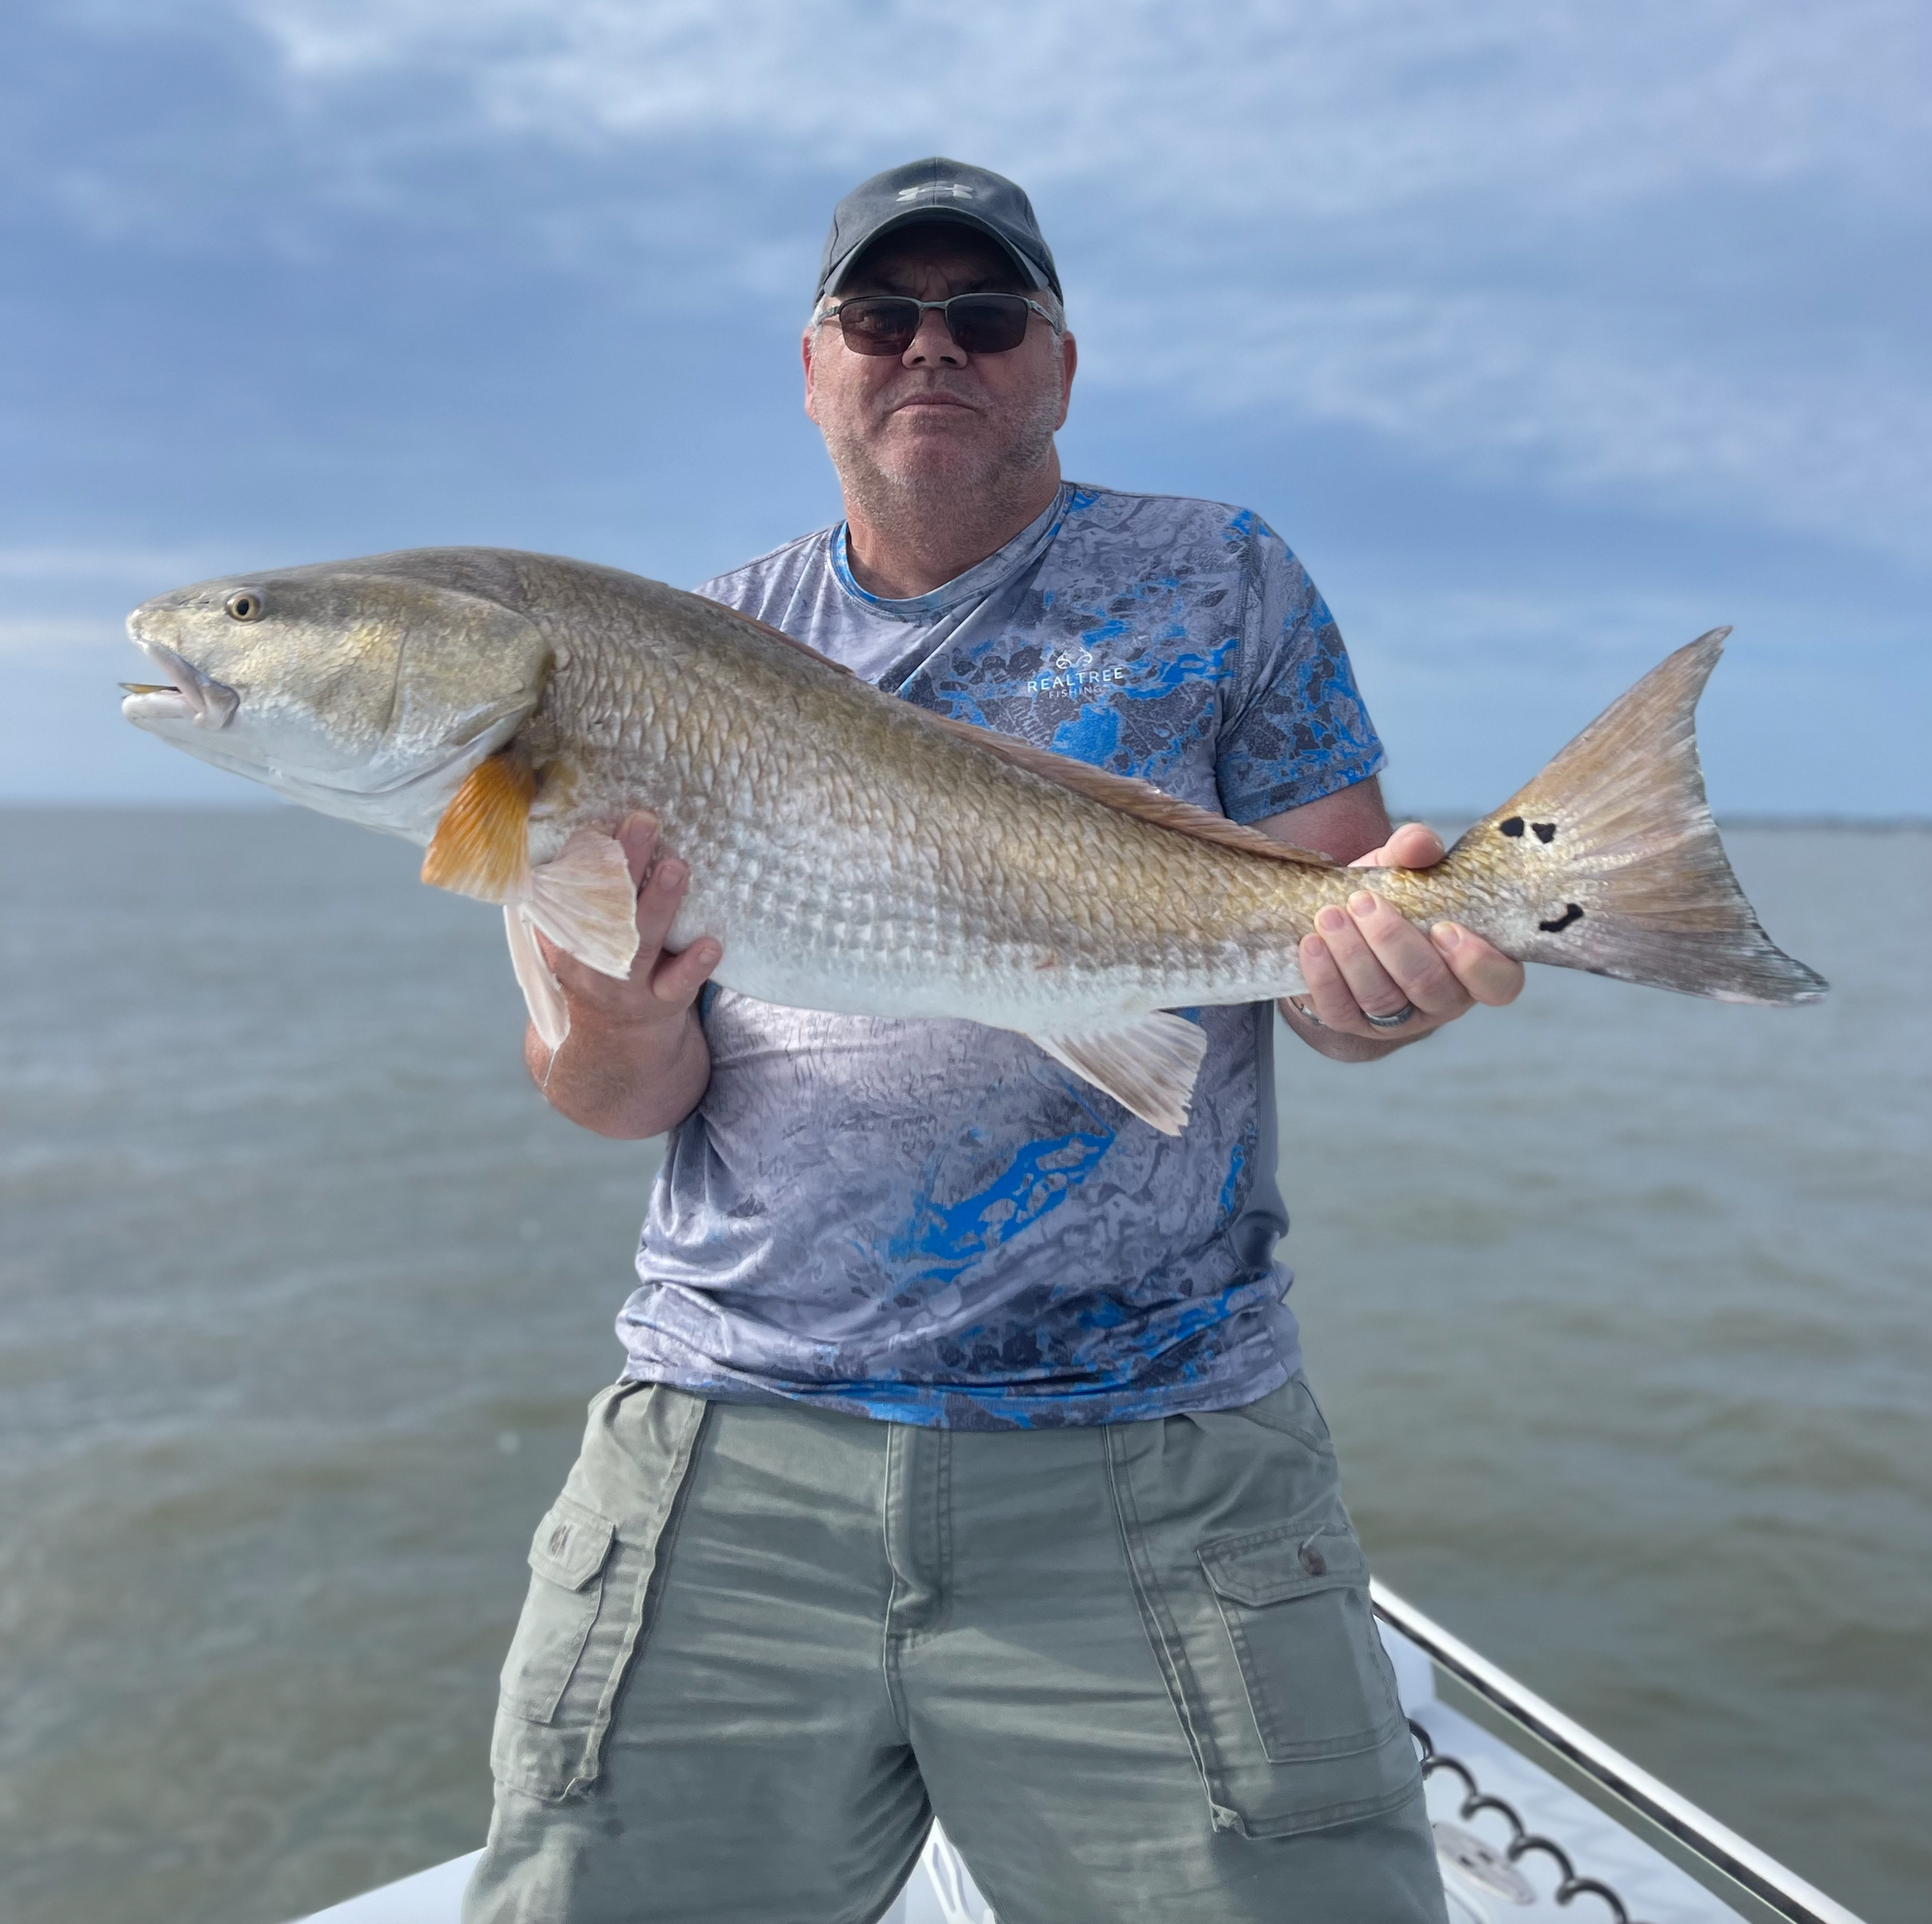 Redfish action has been OFF THE HOOK the last few days!